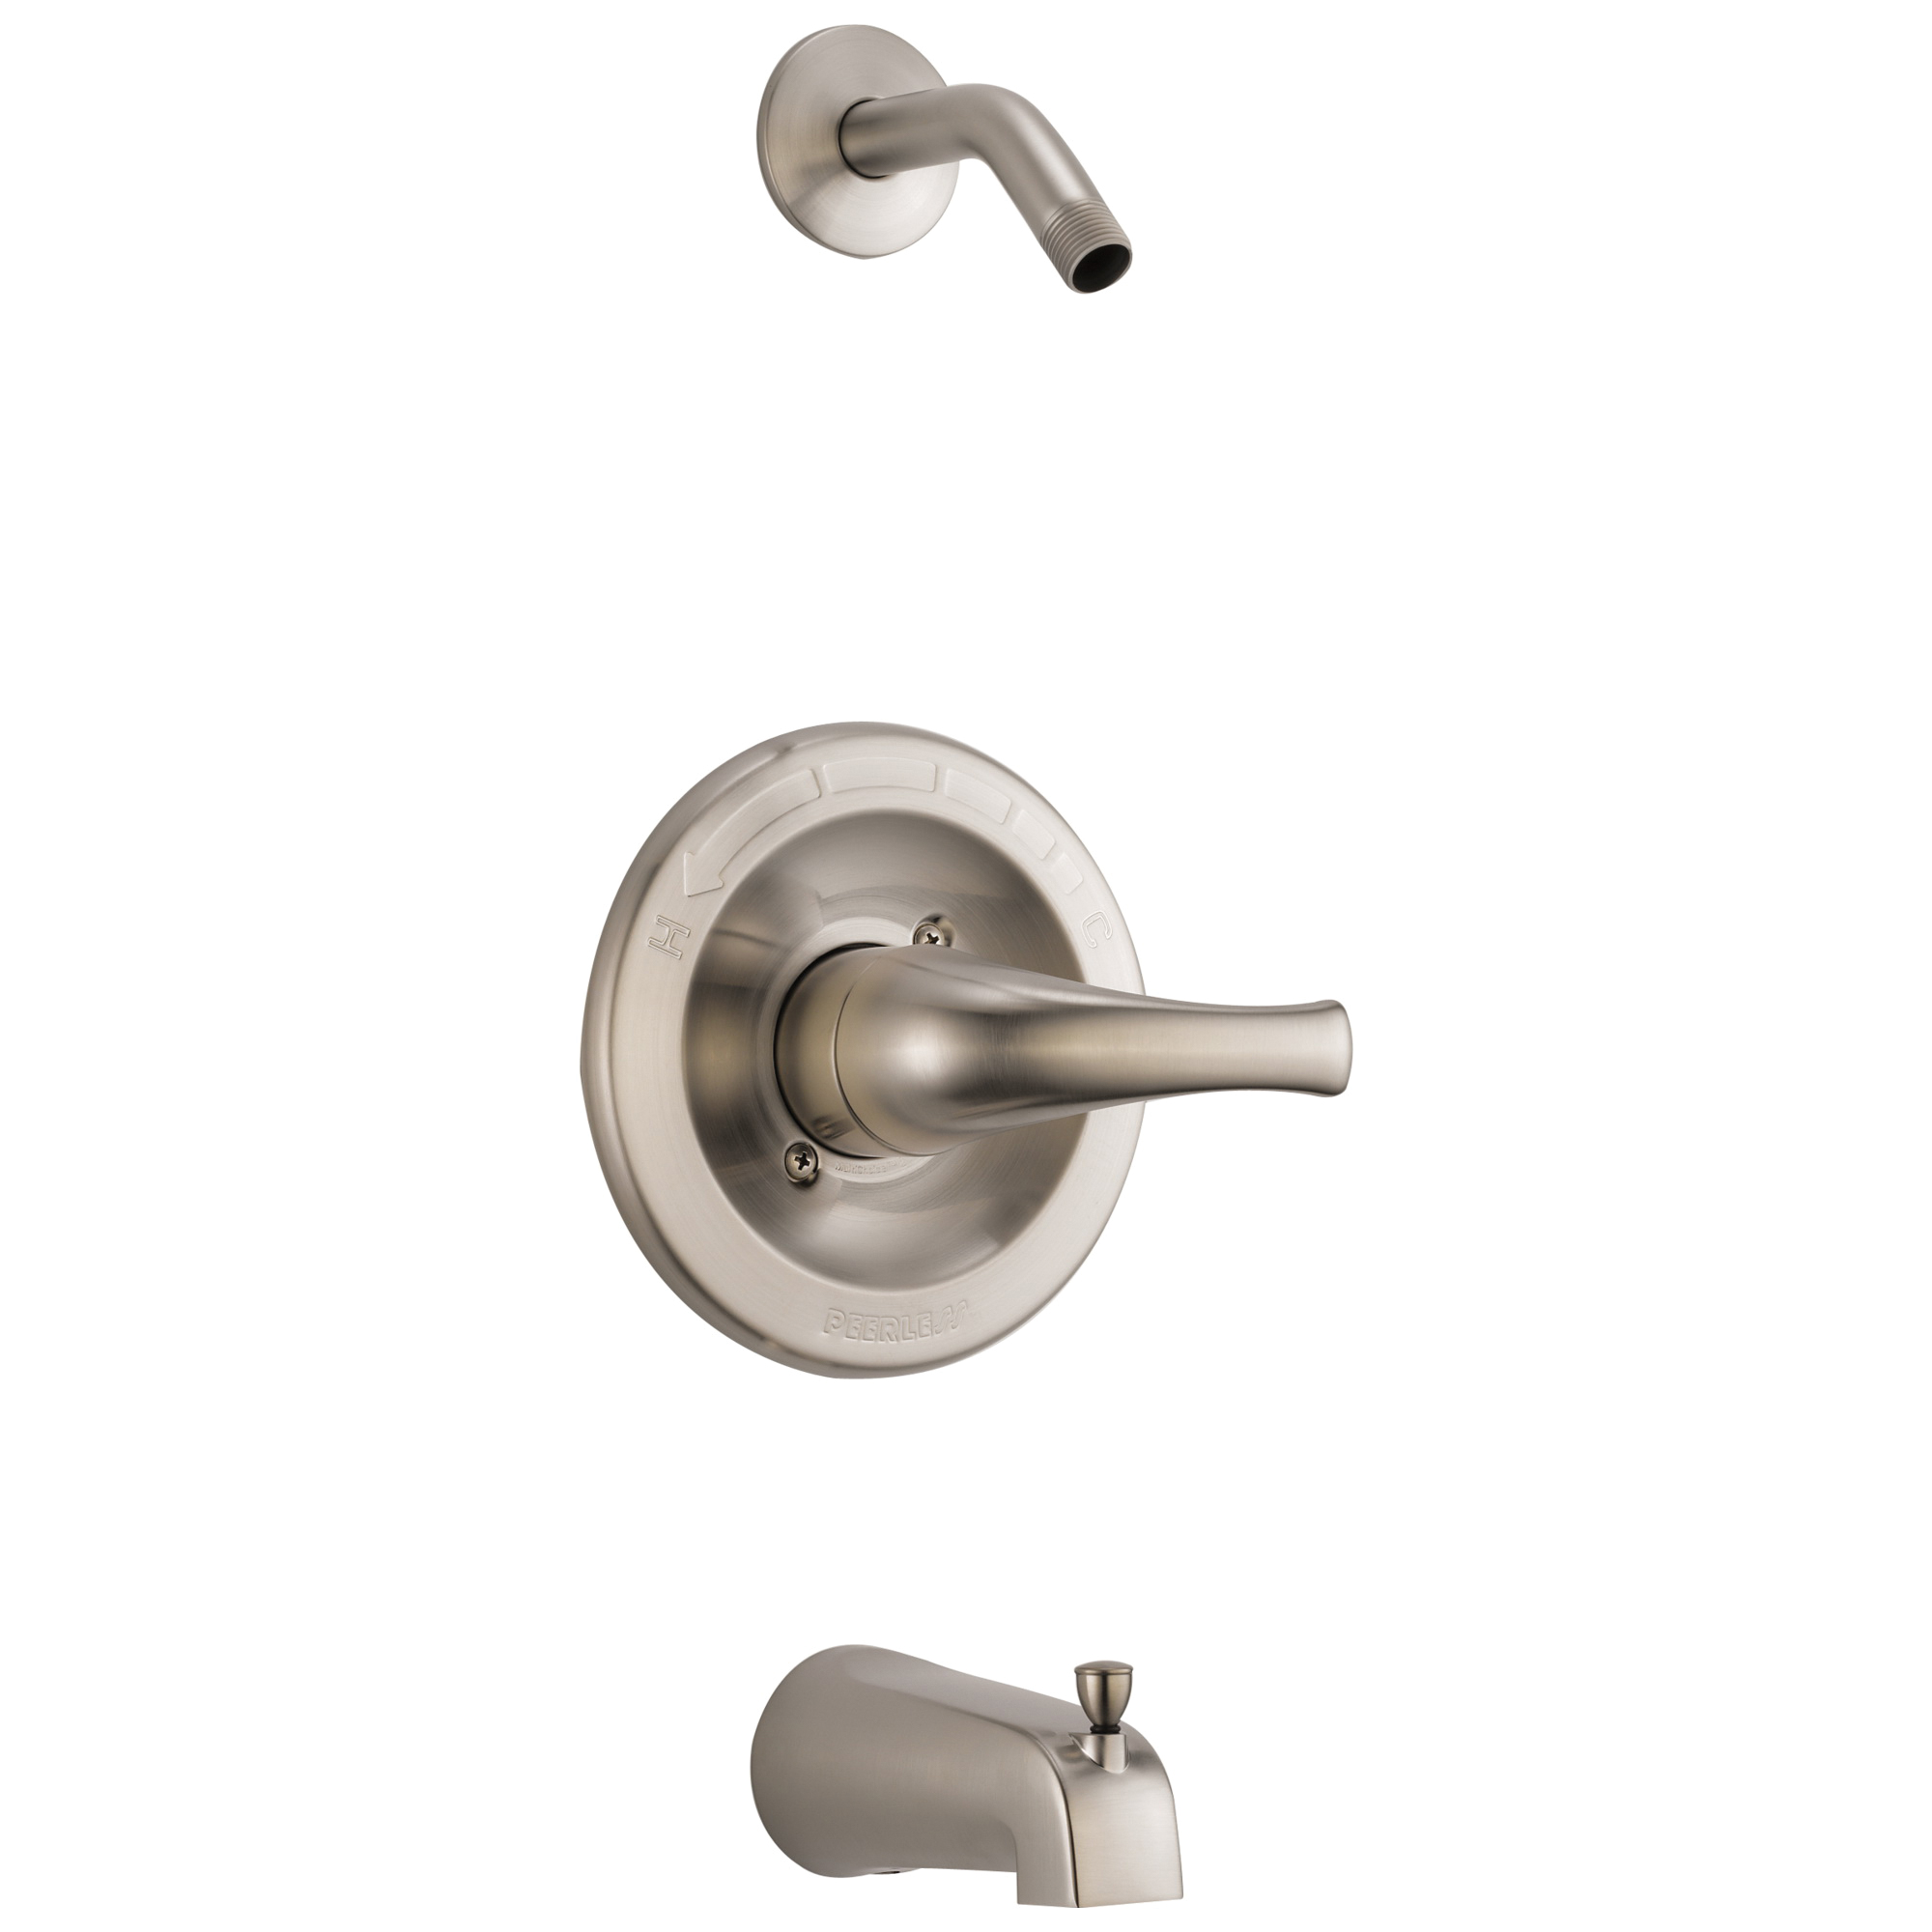 Peerless Ptt1773 Bnlhd Choice 1 Function Tub And Shower Trim 1 5 Gpm Shower Hand Shower Yes No No Brushed Nickel First Supply